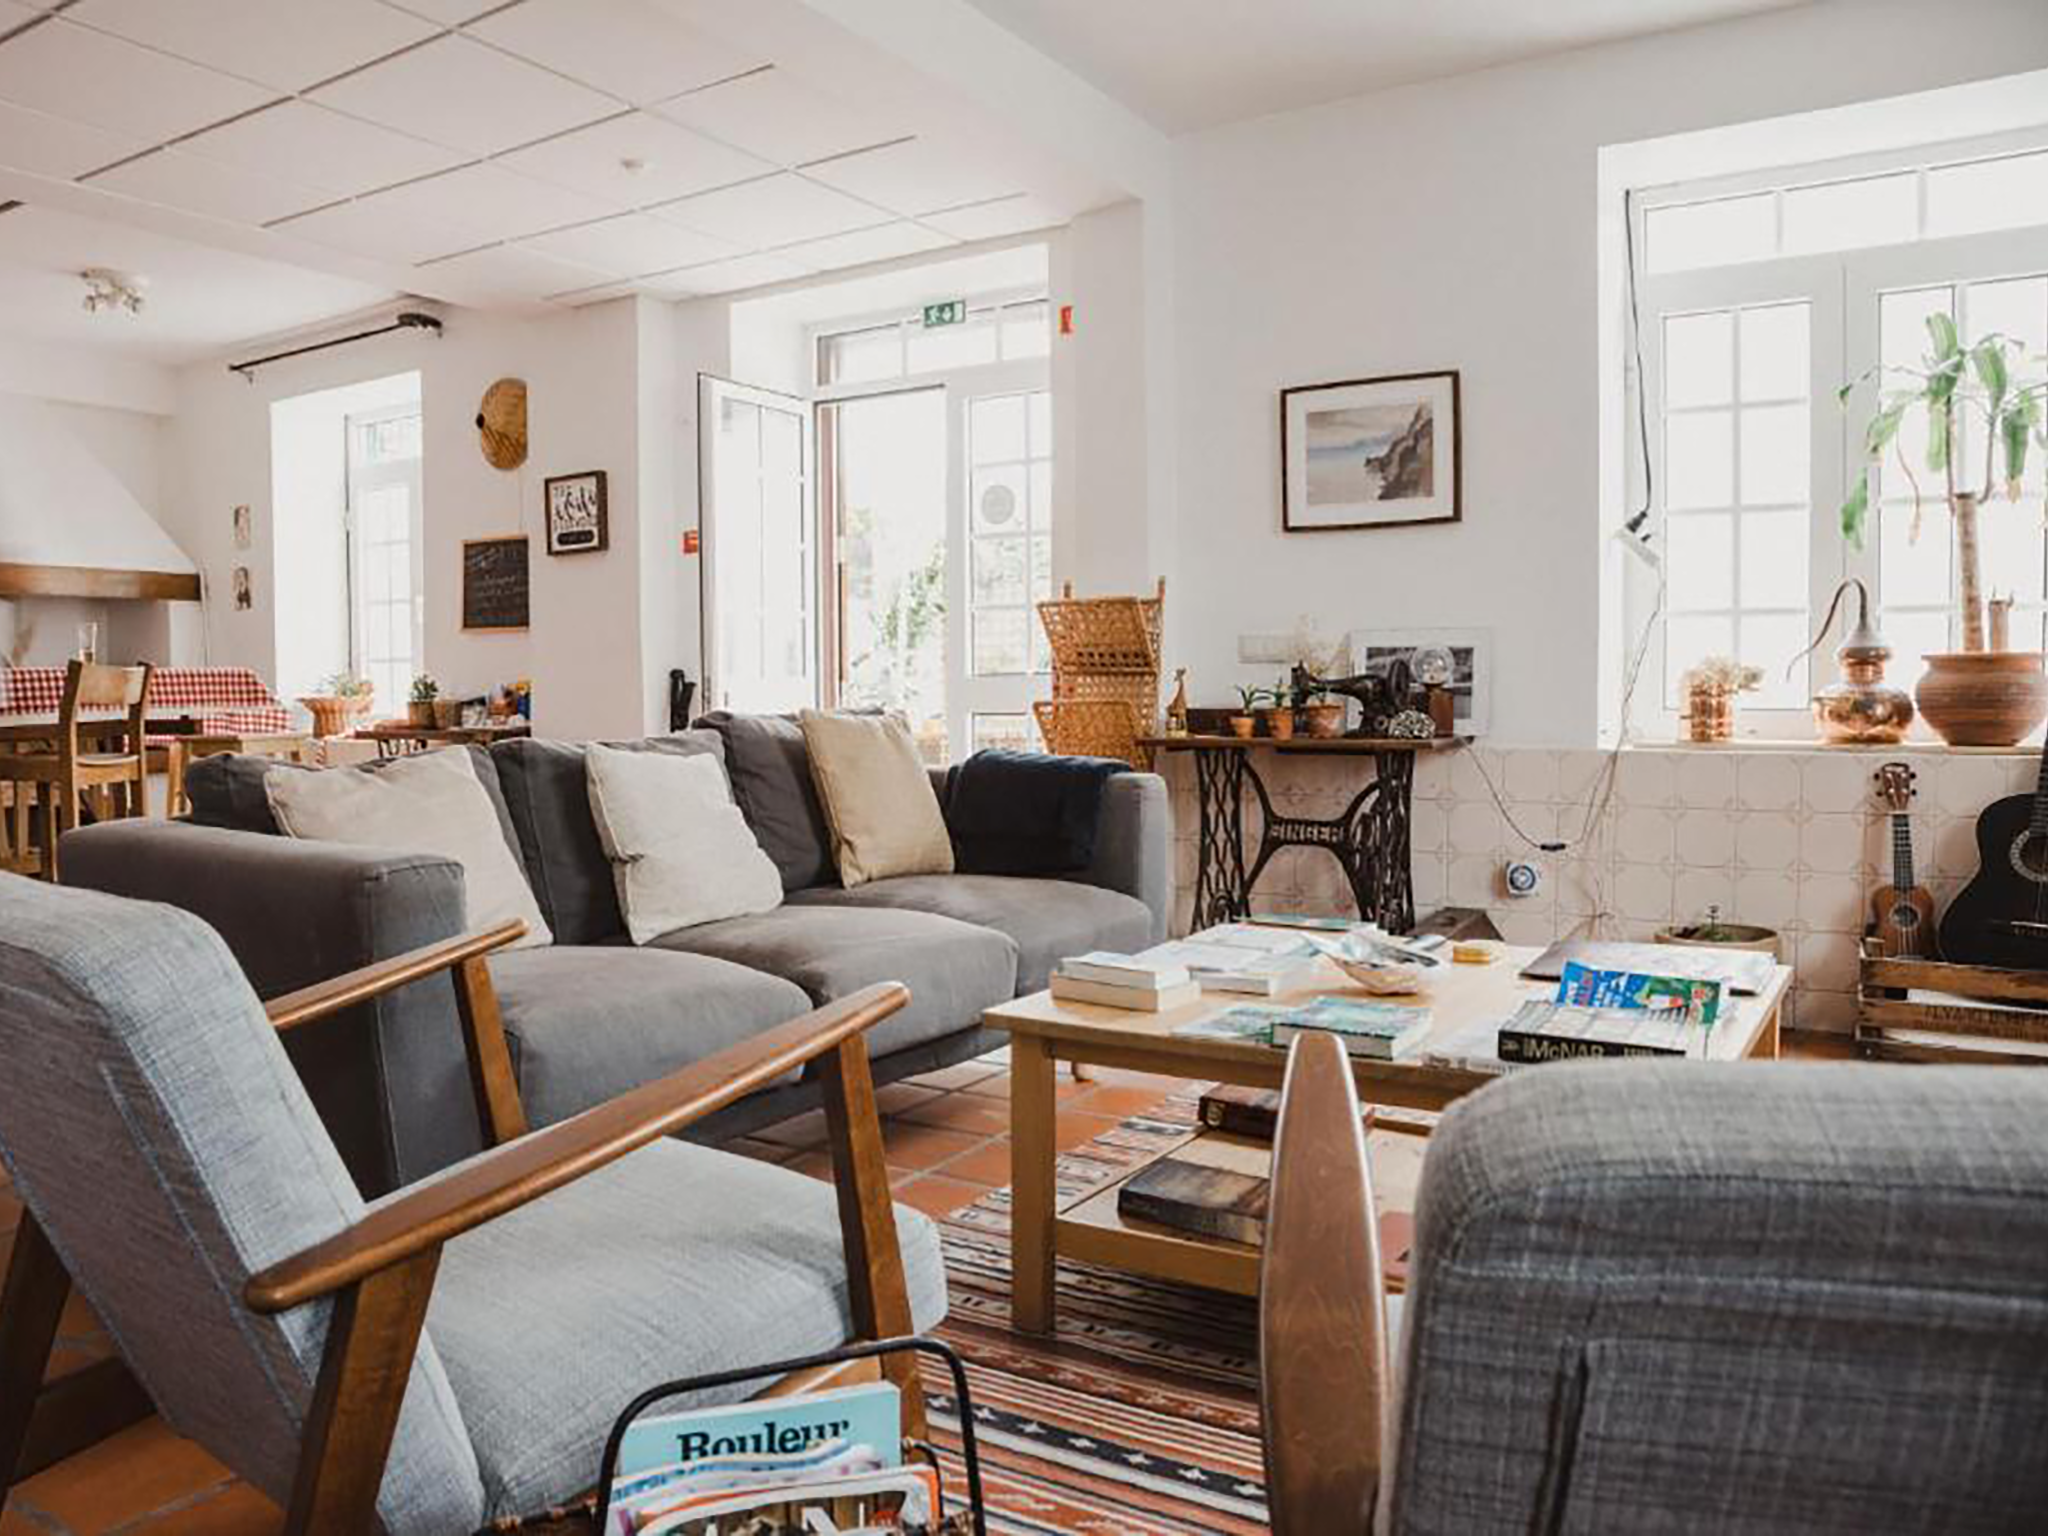 The cosy living room makes this hostel feel warm and welcoming